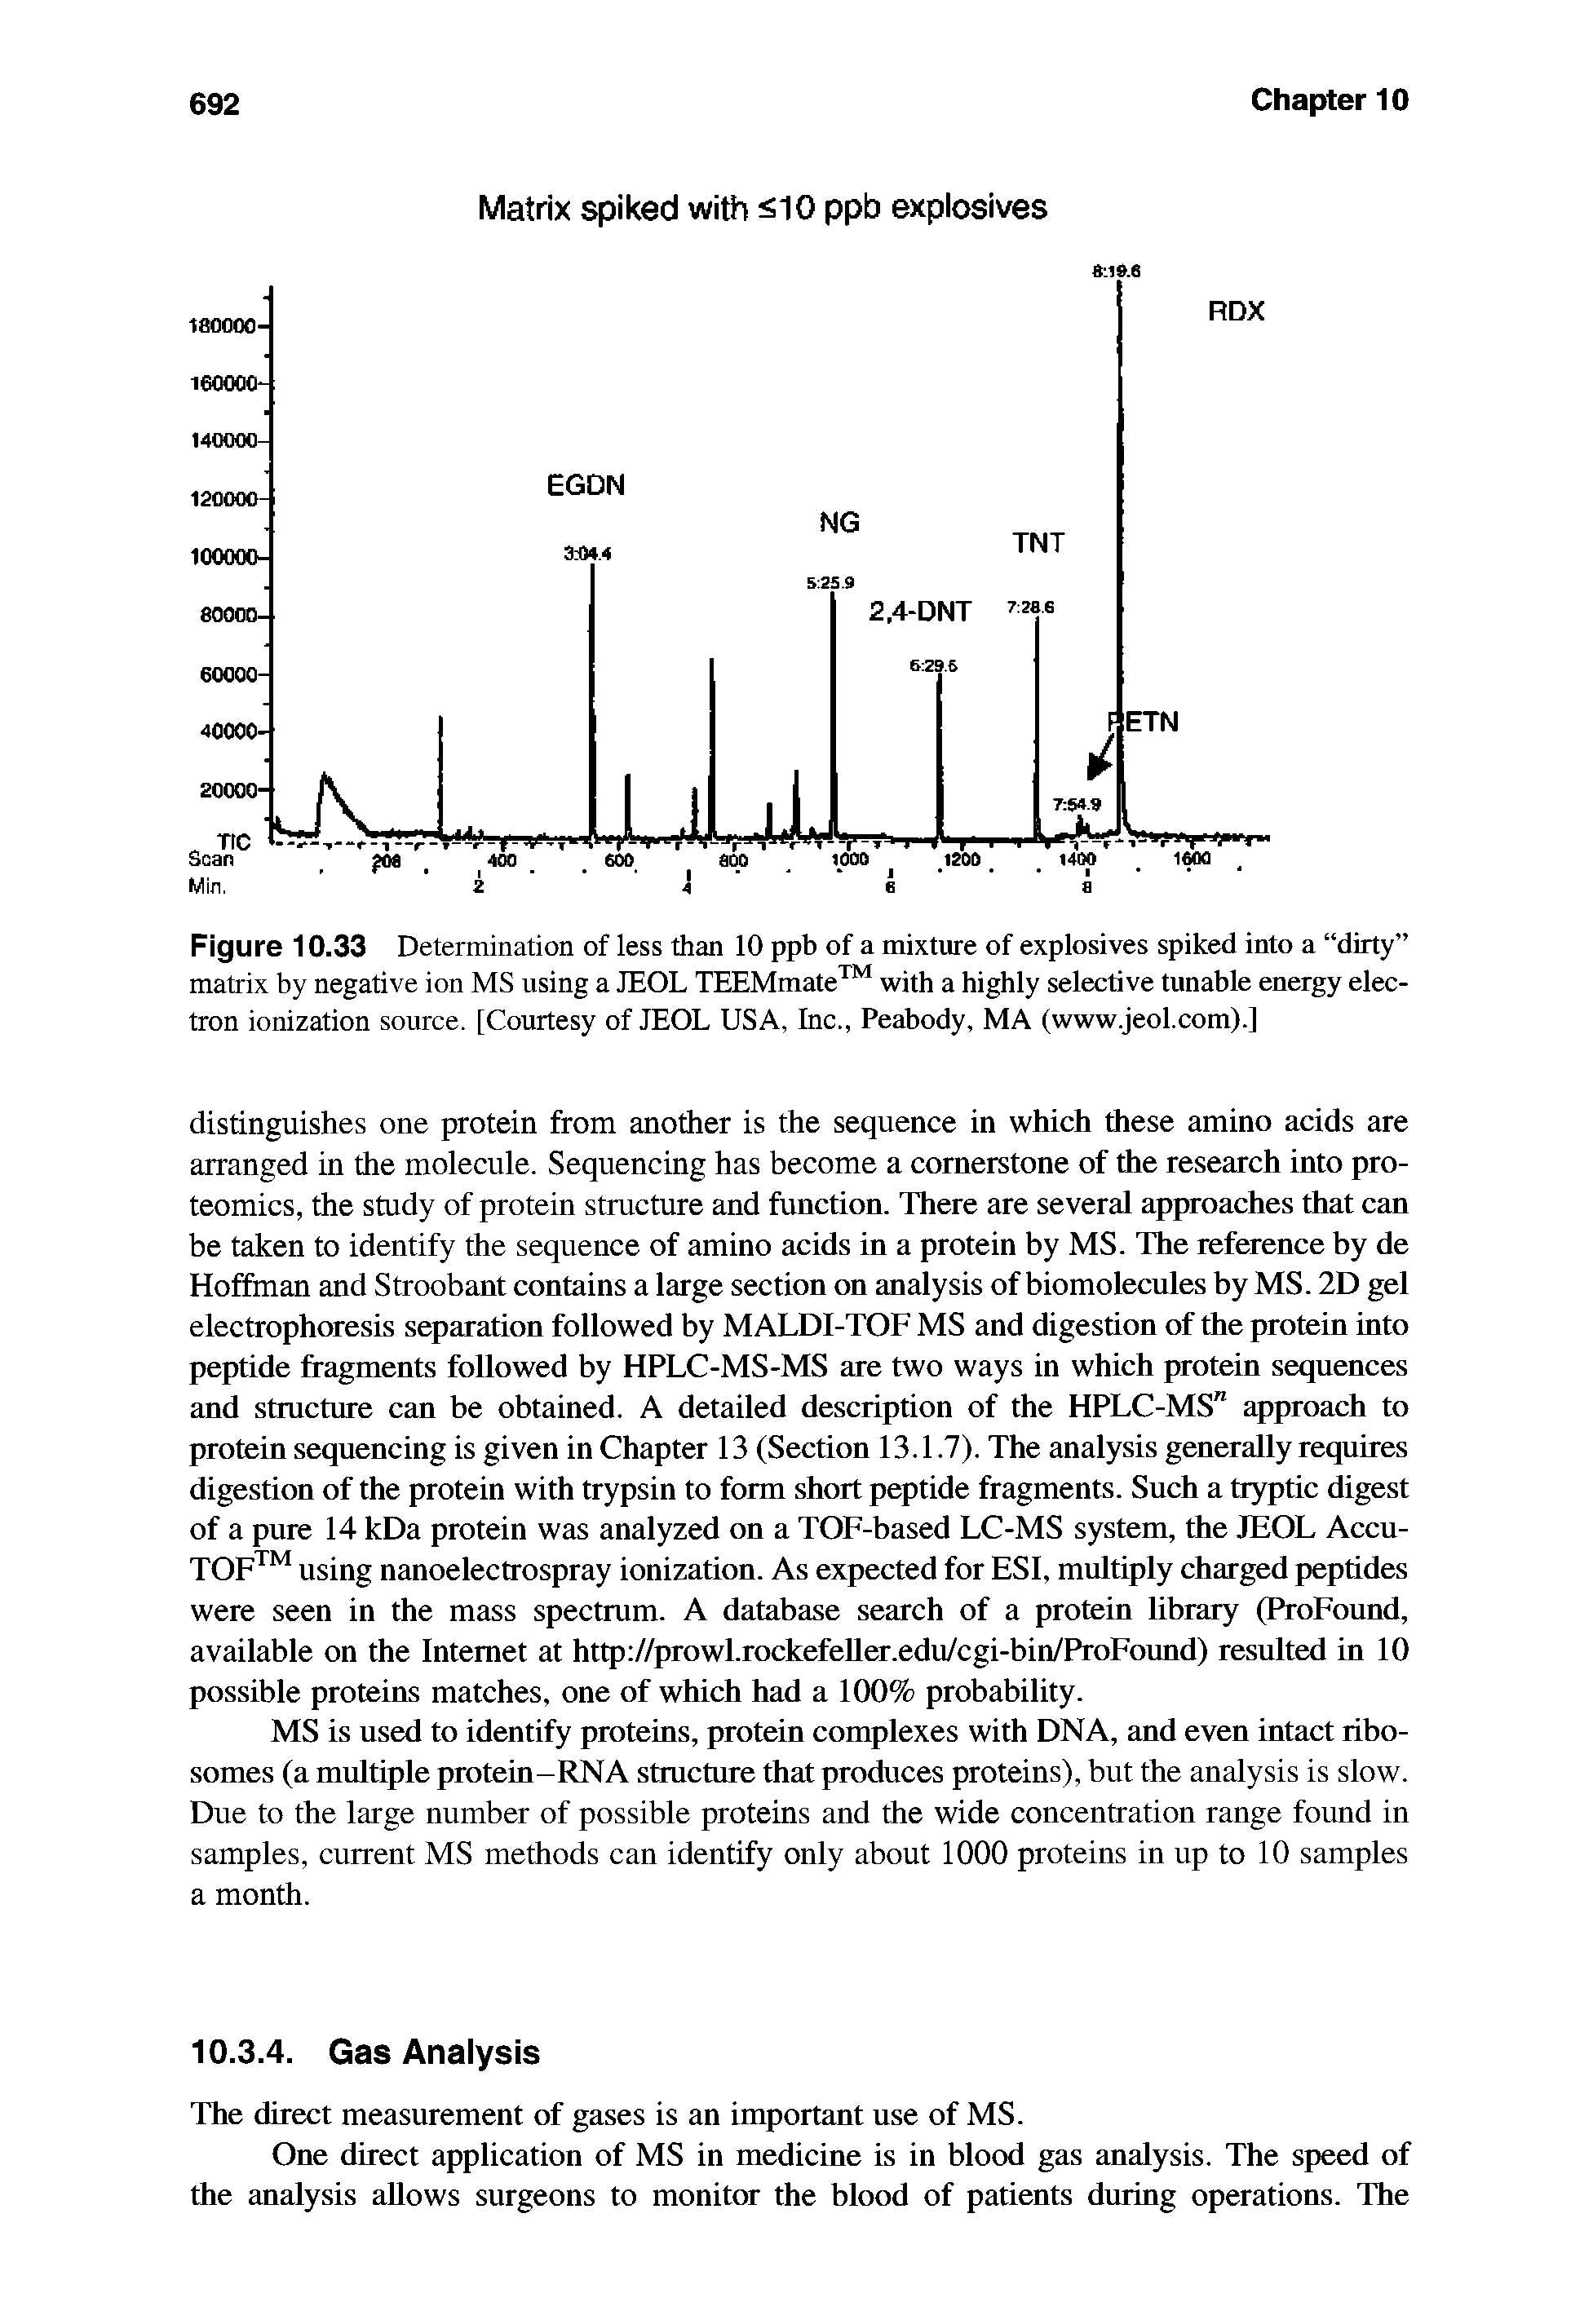 Figure 10.33 Determination of less than 10 ppb of a mixture of explosives spiked into a dirty matrix by negative ion MS using a JEOL TEEMmate with a highly selective tunable energy electron ionization source. [Courtesy of JEOL USA, Inc., Peabody, MA (www.jeol.com).]...